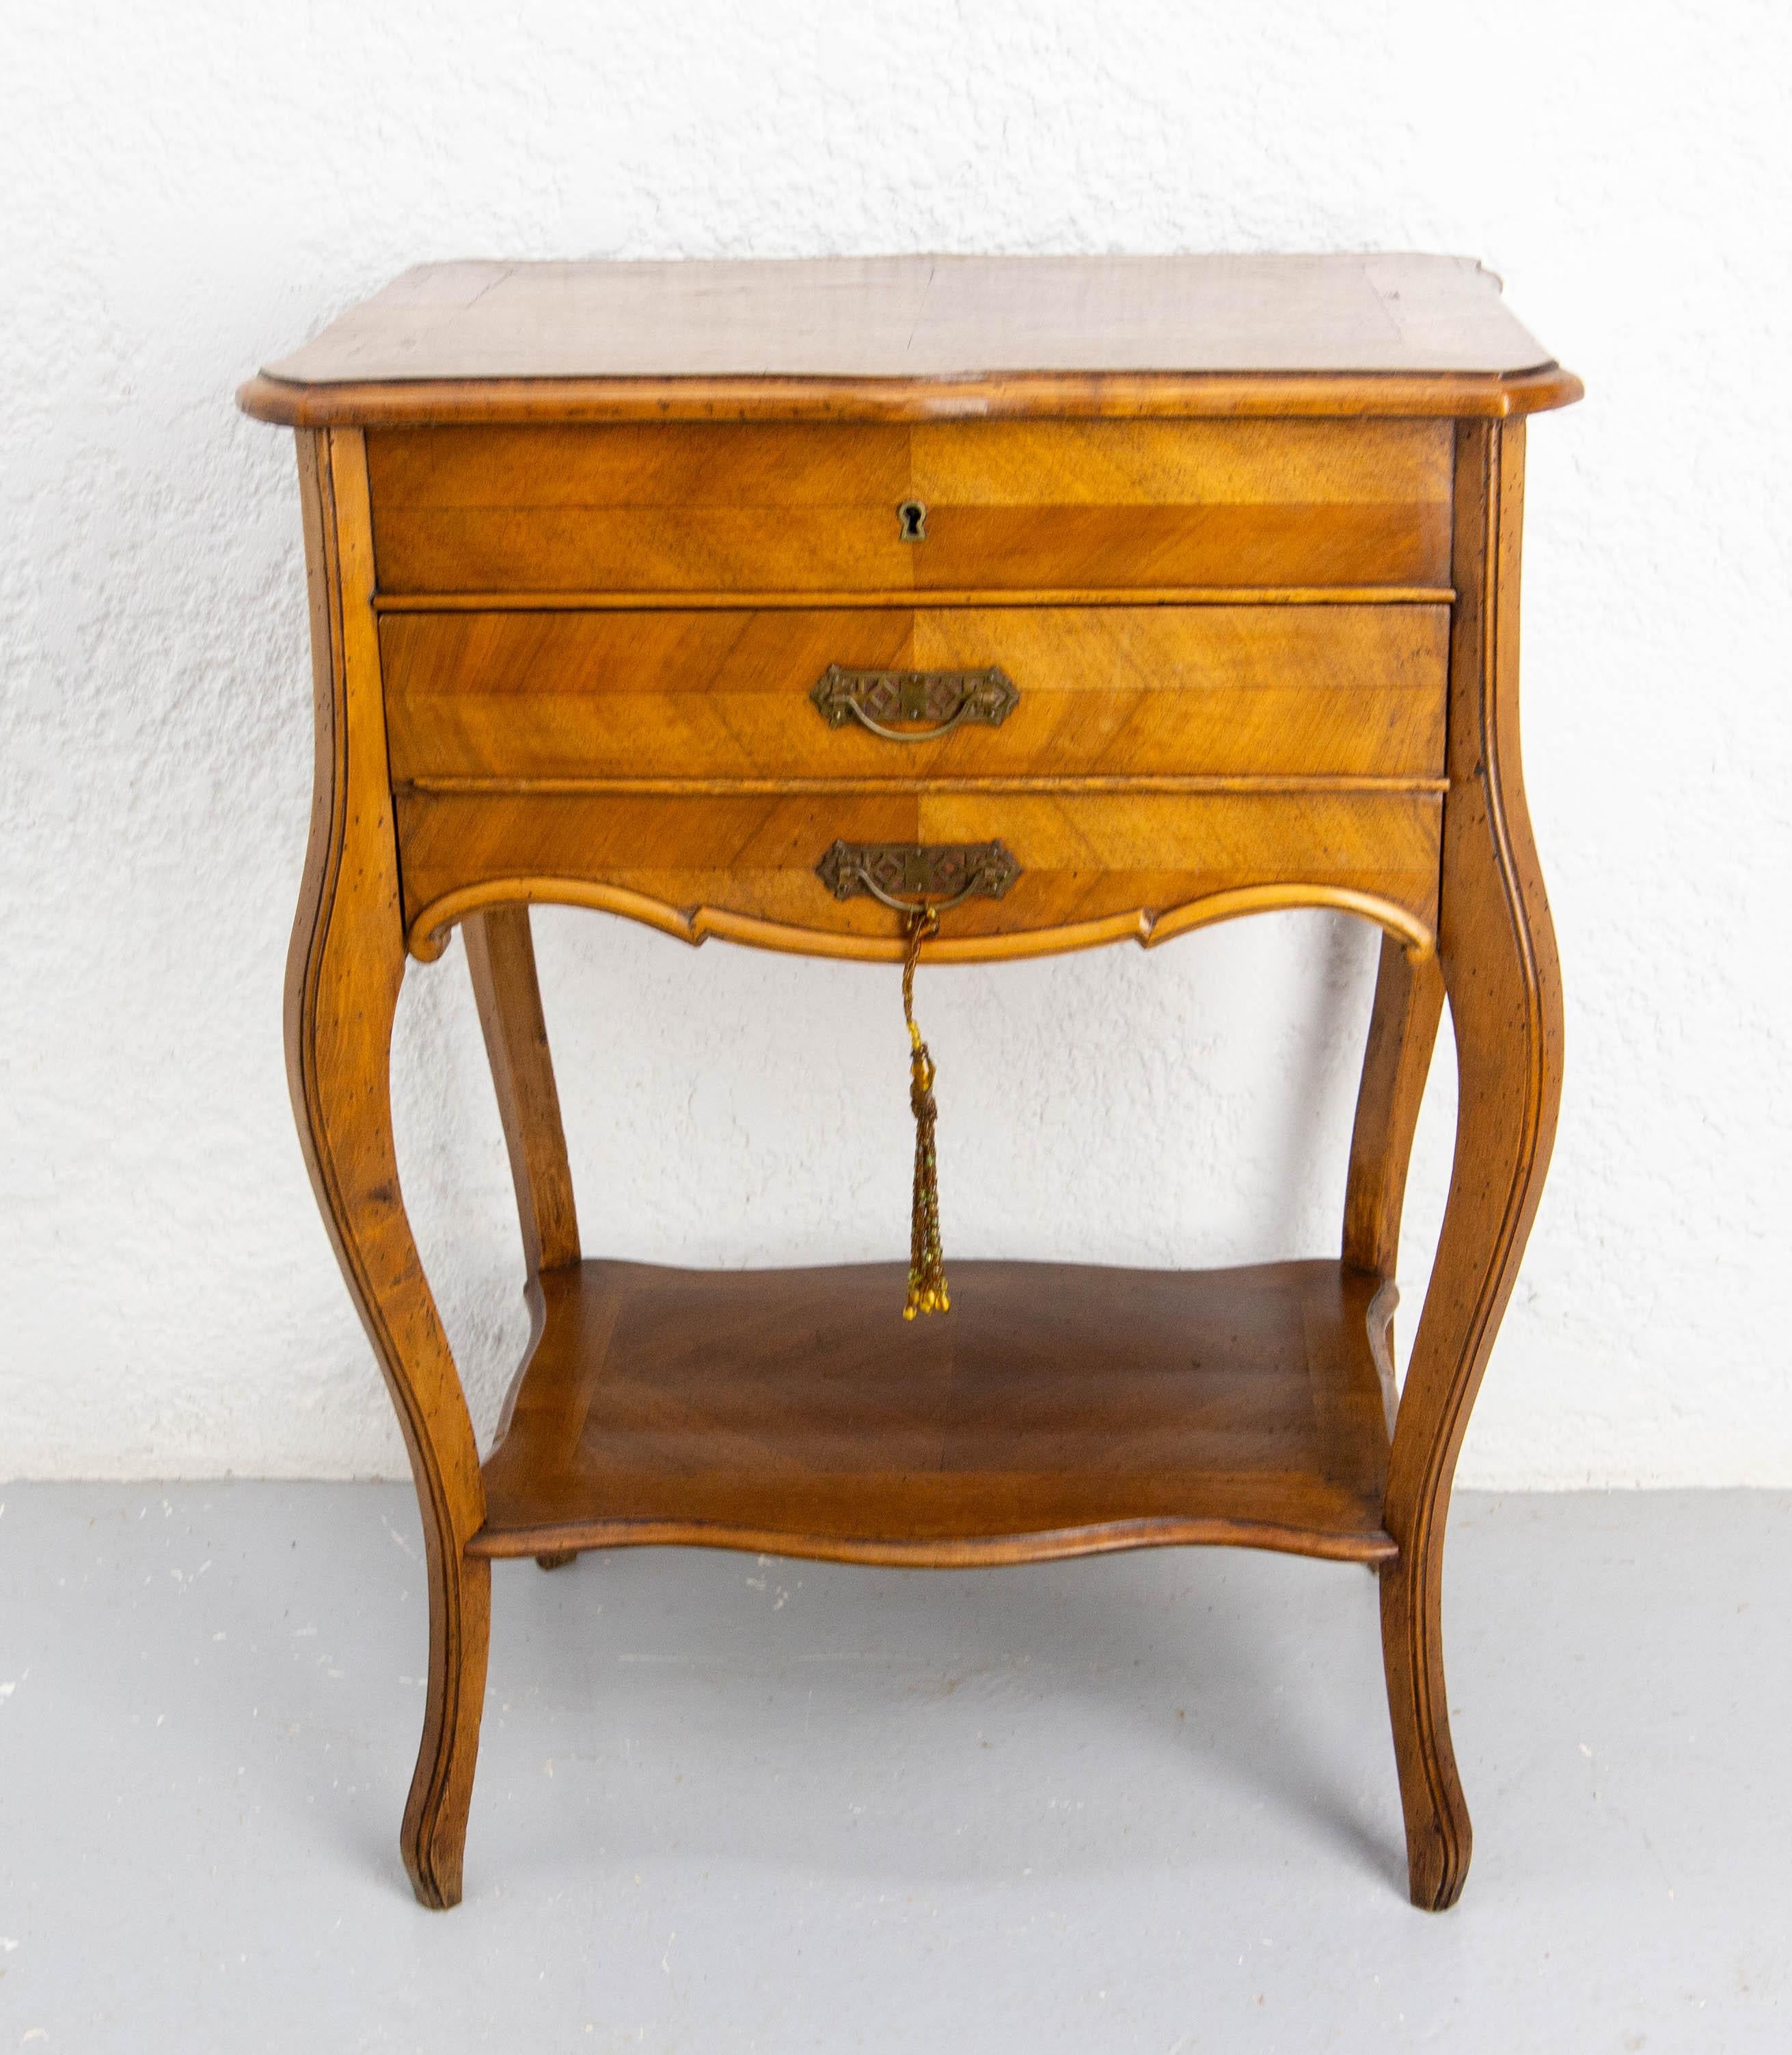 Antique sewing table, made circa 1900 in the Louis 15 style.
The lift-up lid opens up to reveal storage compartments for sewing materials. It also reveals a little beveled mirror.
Good antique condition, with minor signs of age and wear: the bottom